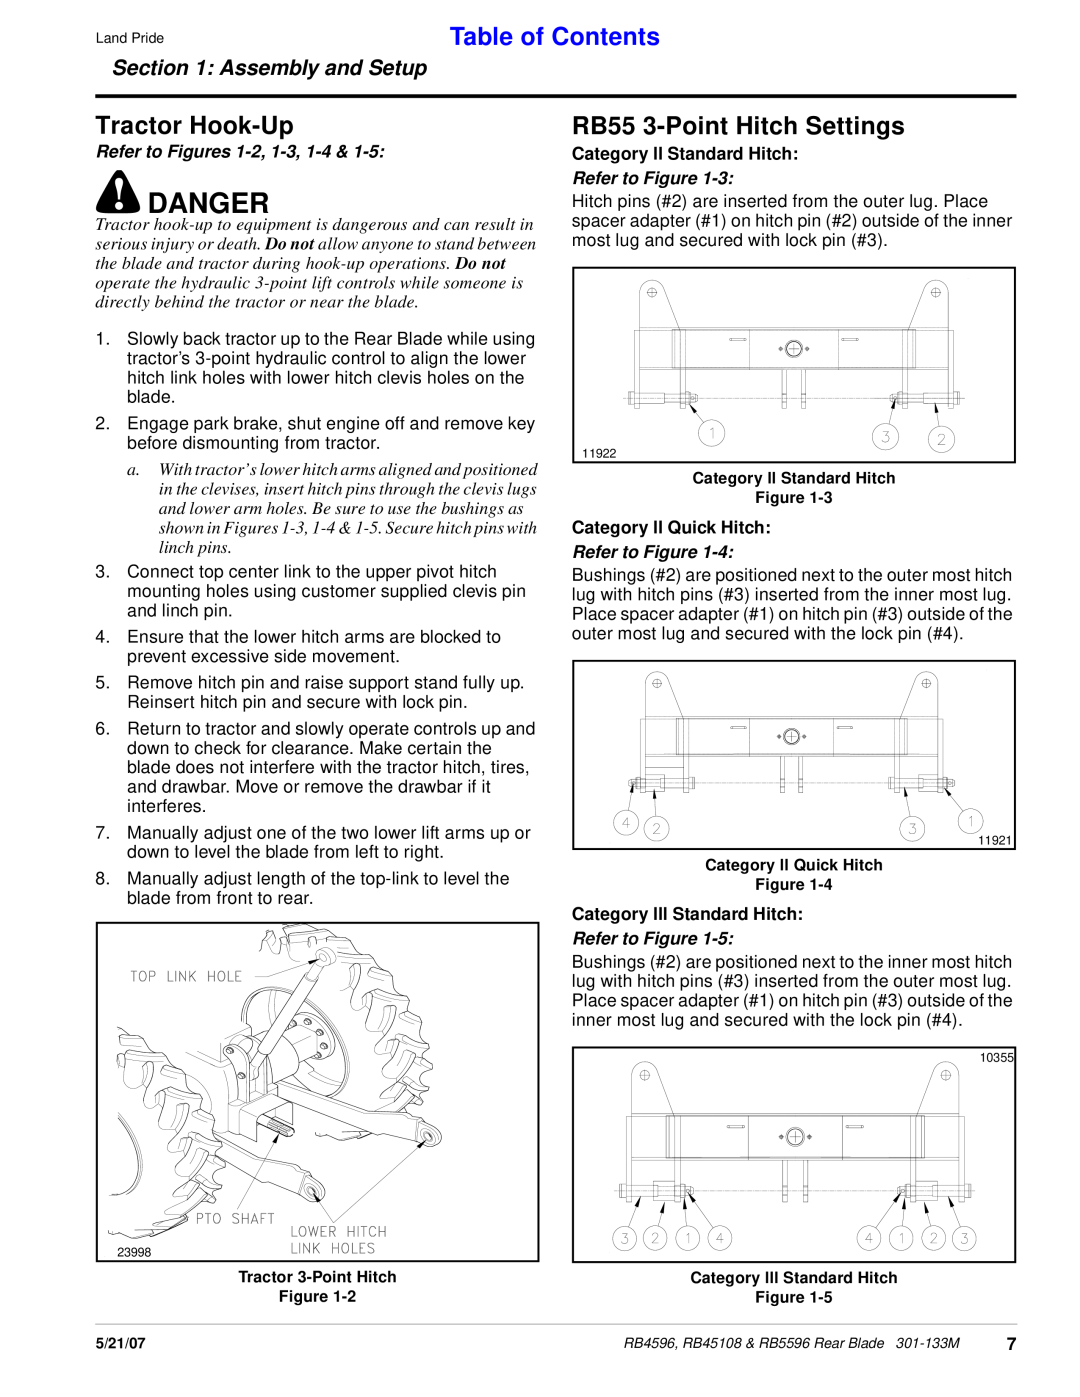 Land Pride RB5596 Danger, Tractor Hook-Up, RB55 3-Point Hitch Settings, Refer to Figures 1-2, 1-3, 1-4, Table of Contents 